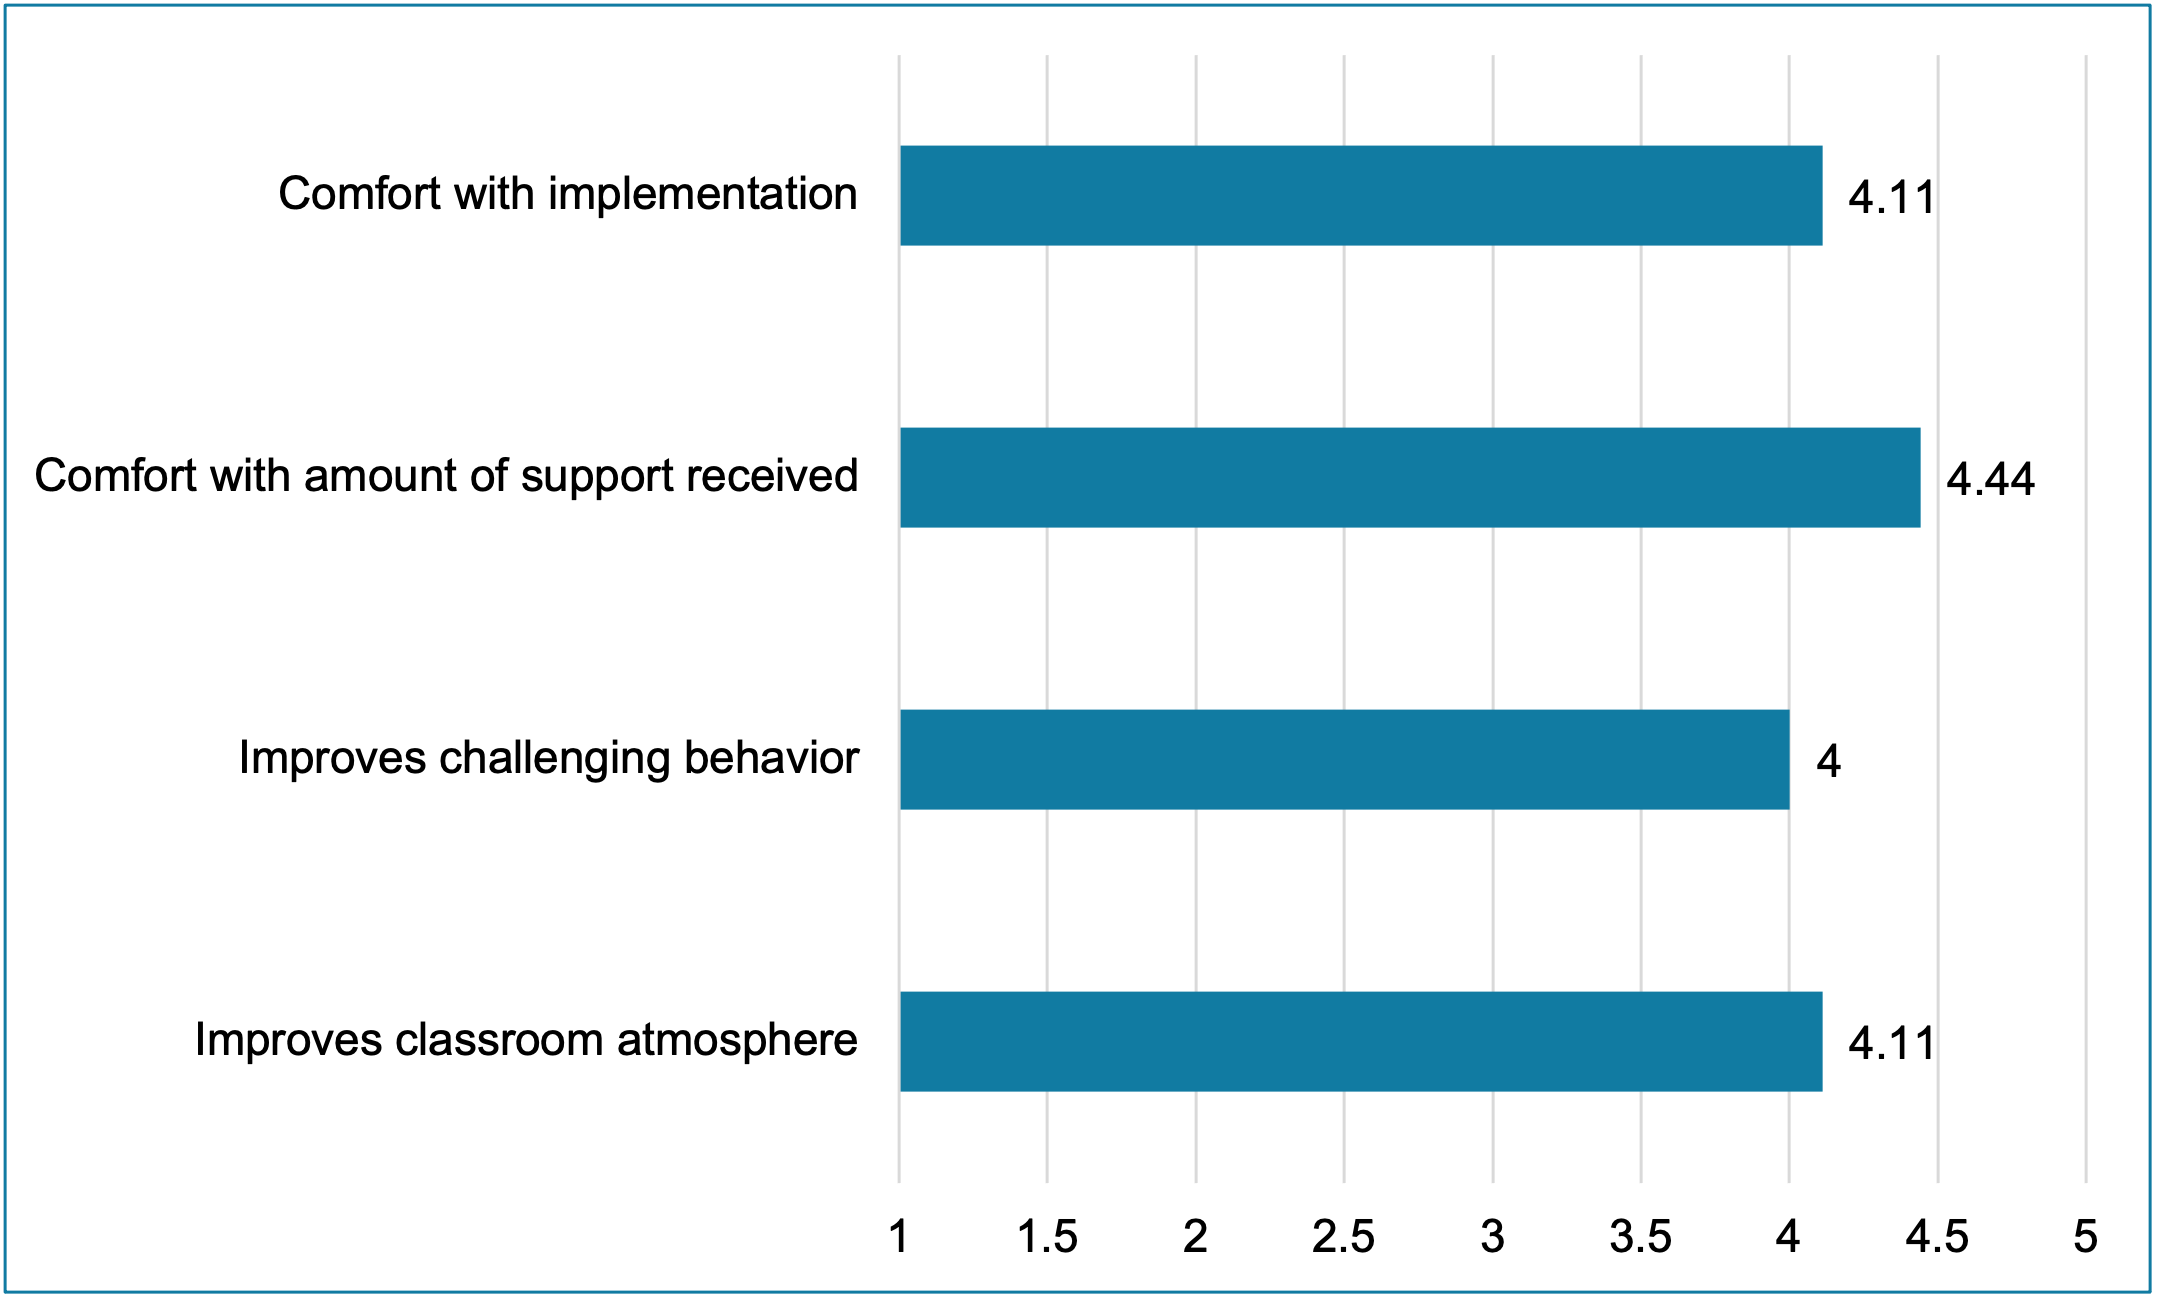 Table 1: BEST in CLASS Teacher Survey Responses out of a scale of 5. Comfort with implementation: 4.1; Comfort with amount of support received: 4.44; Improves challenging behavior: 4; Improves classroom atmosphere: 4.11